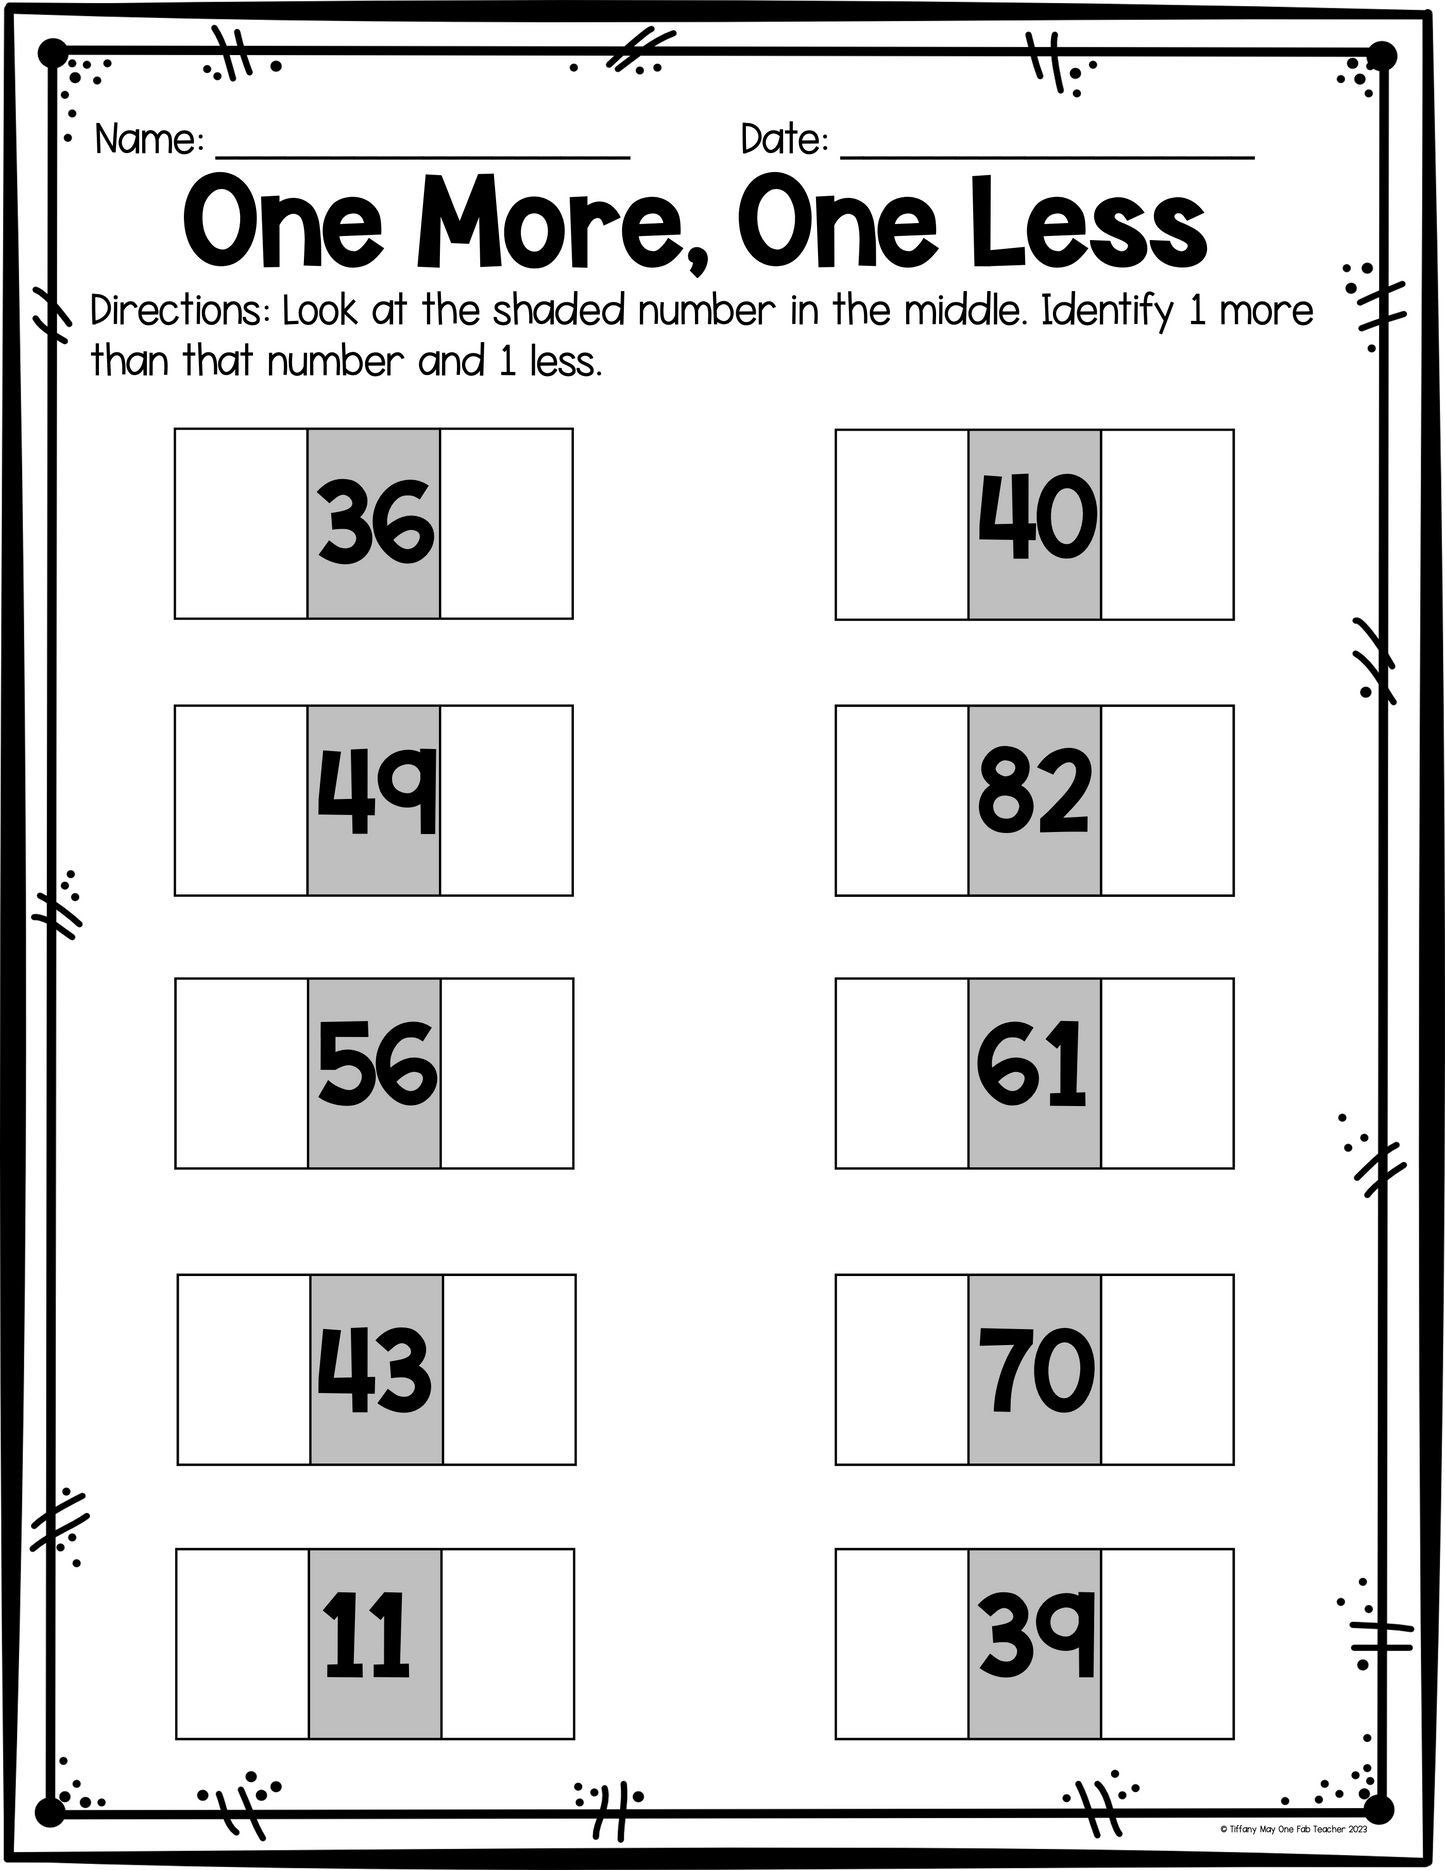 One More and One Less | Elementary Math Worksheets